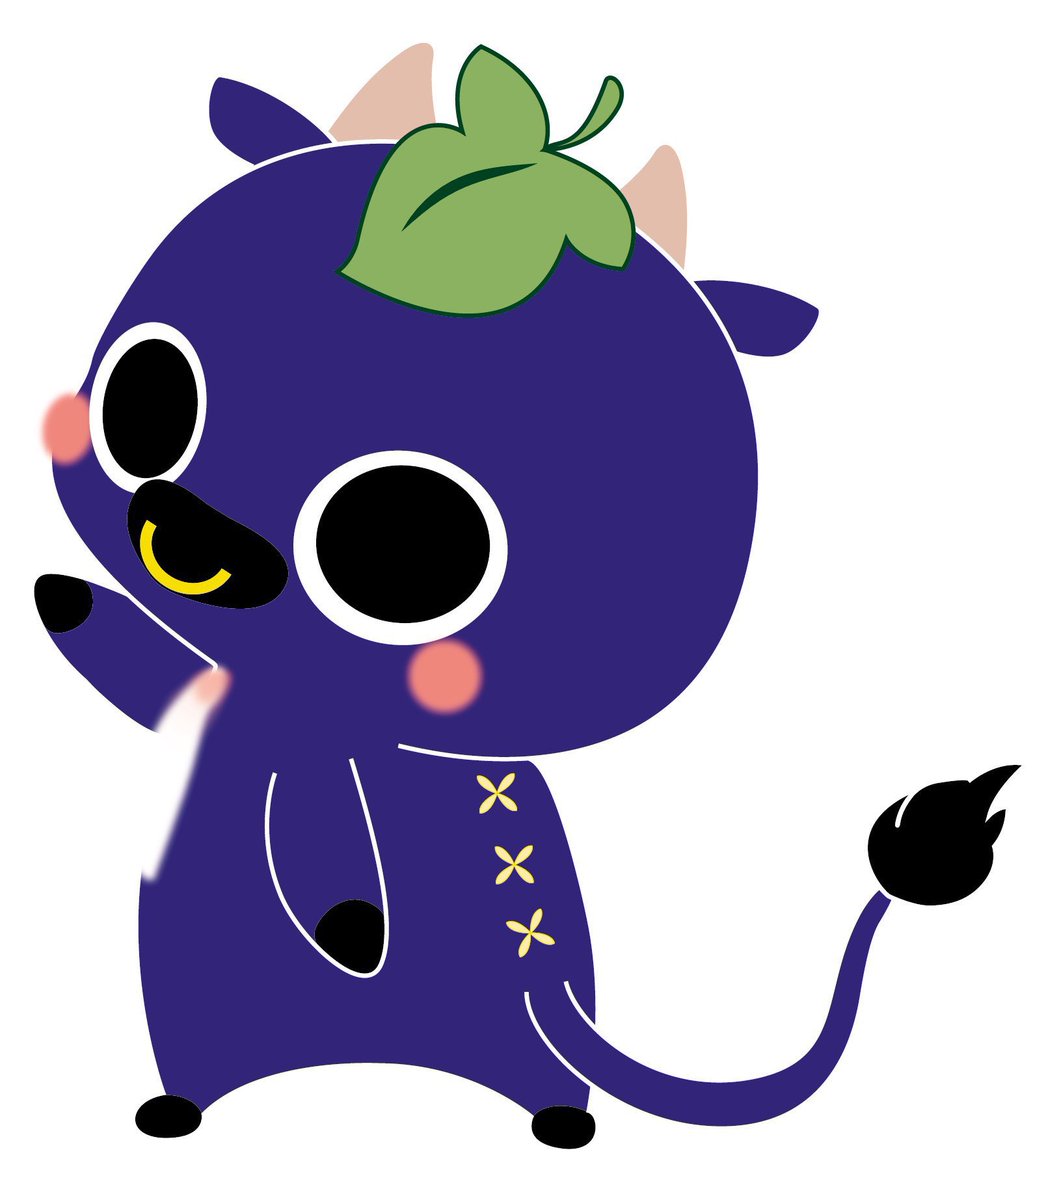 「Niimin, a mix of a grape and a cow, is t」|Mondo Mascotsのイラスト